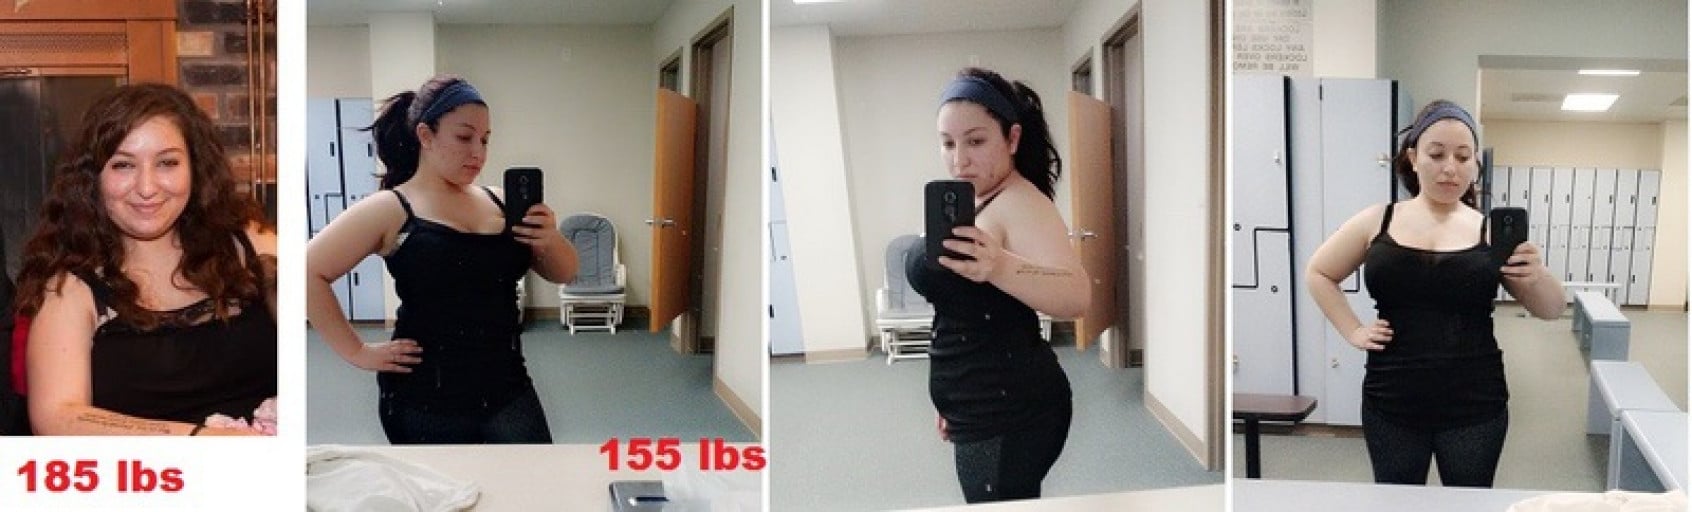 32 lbs Weight Loss Before and After 4'10 Female 187 lbs to 155 lbs